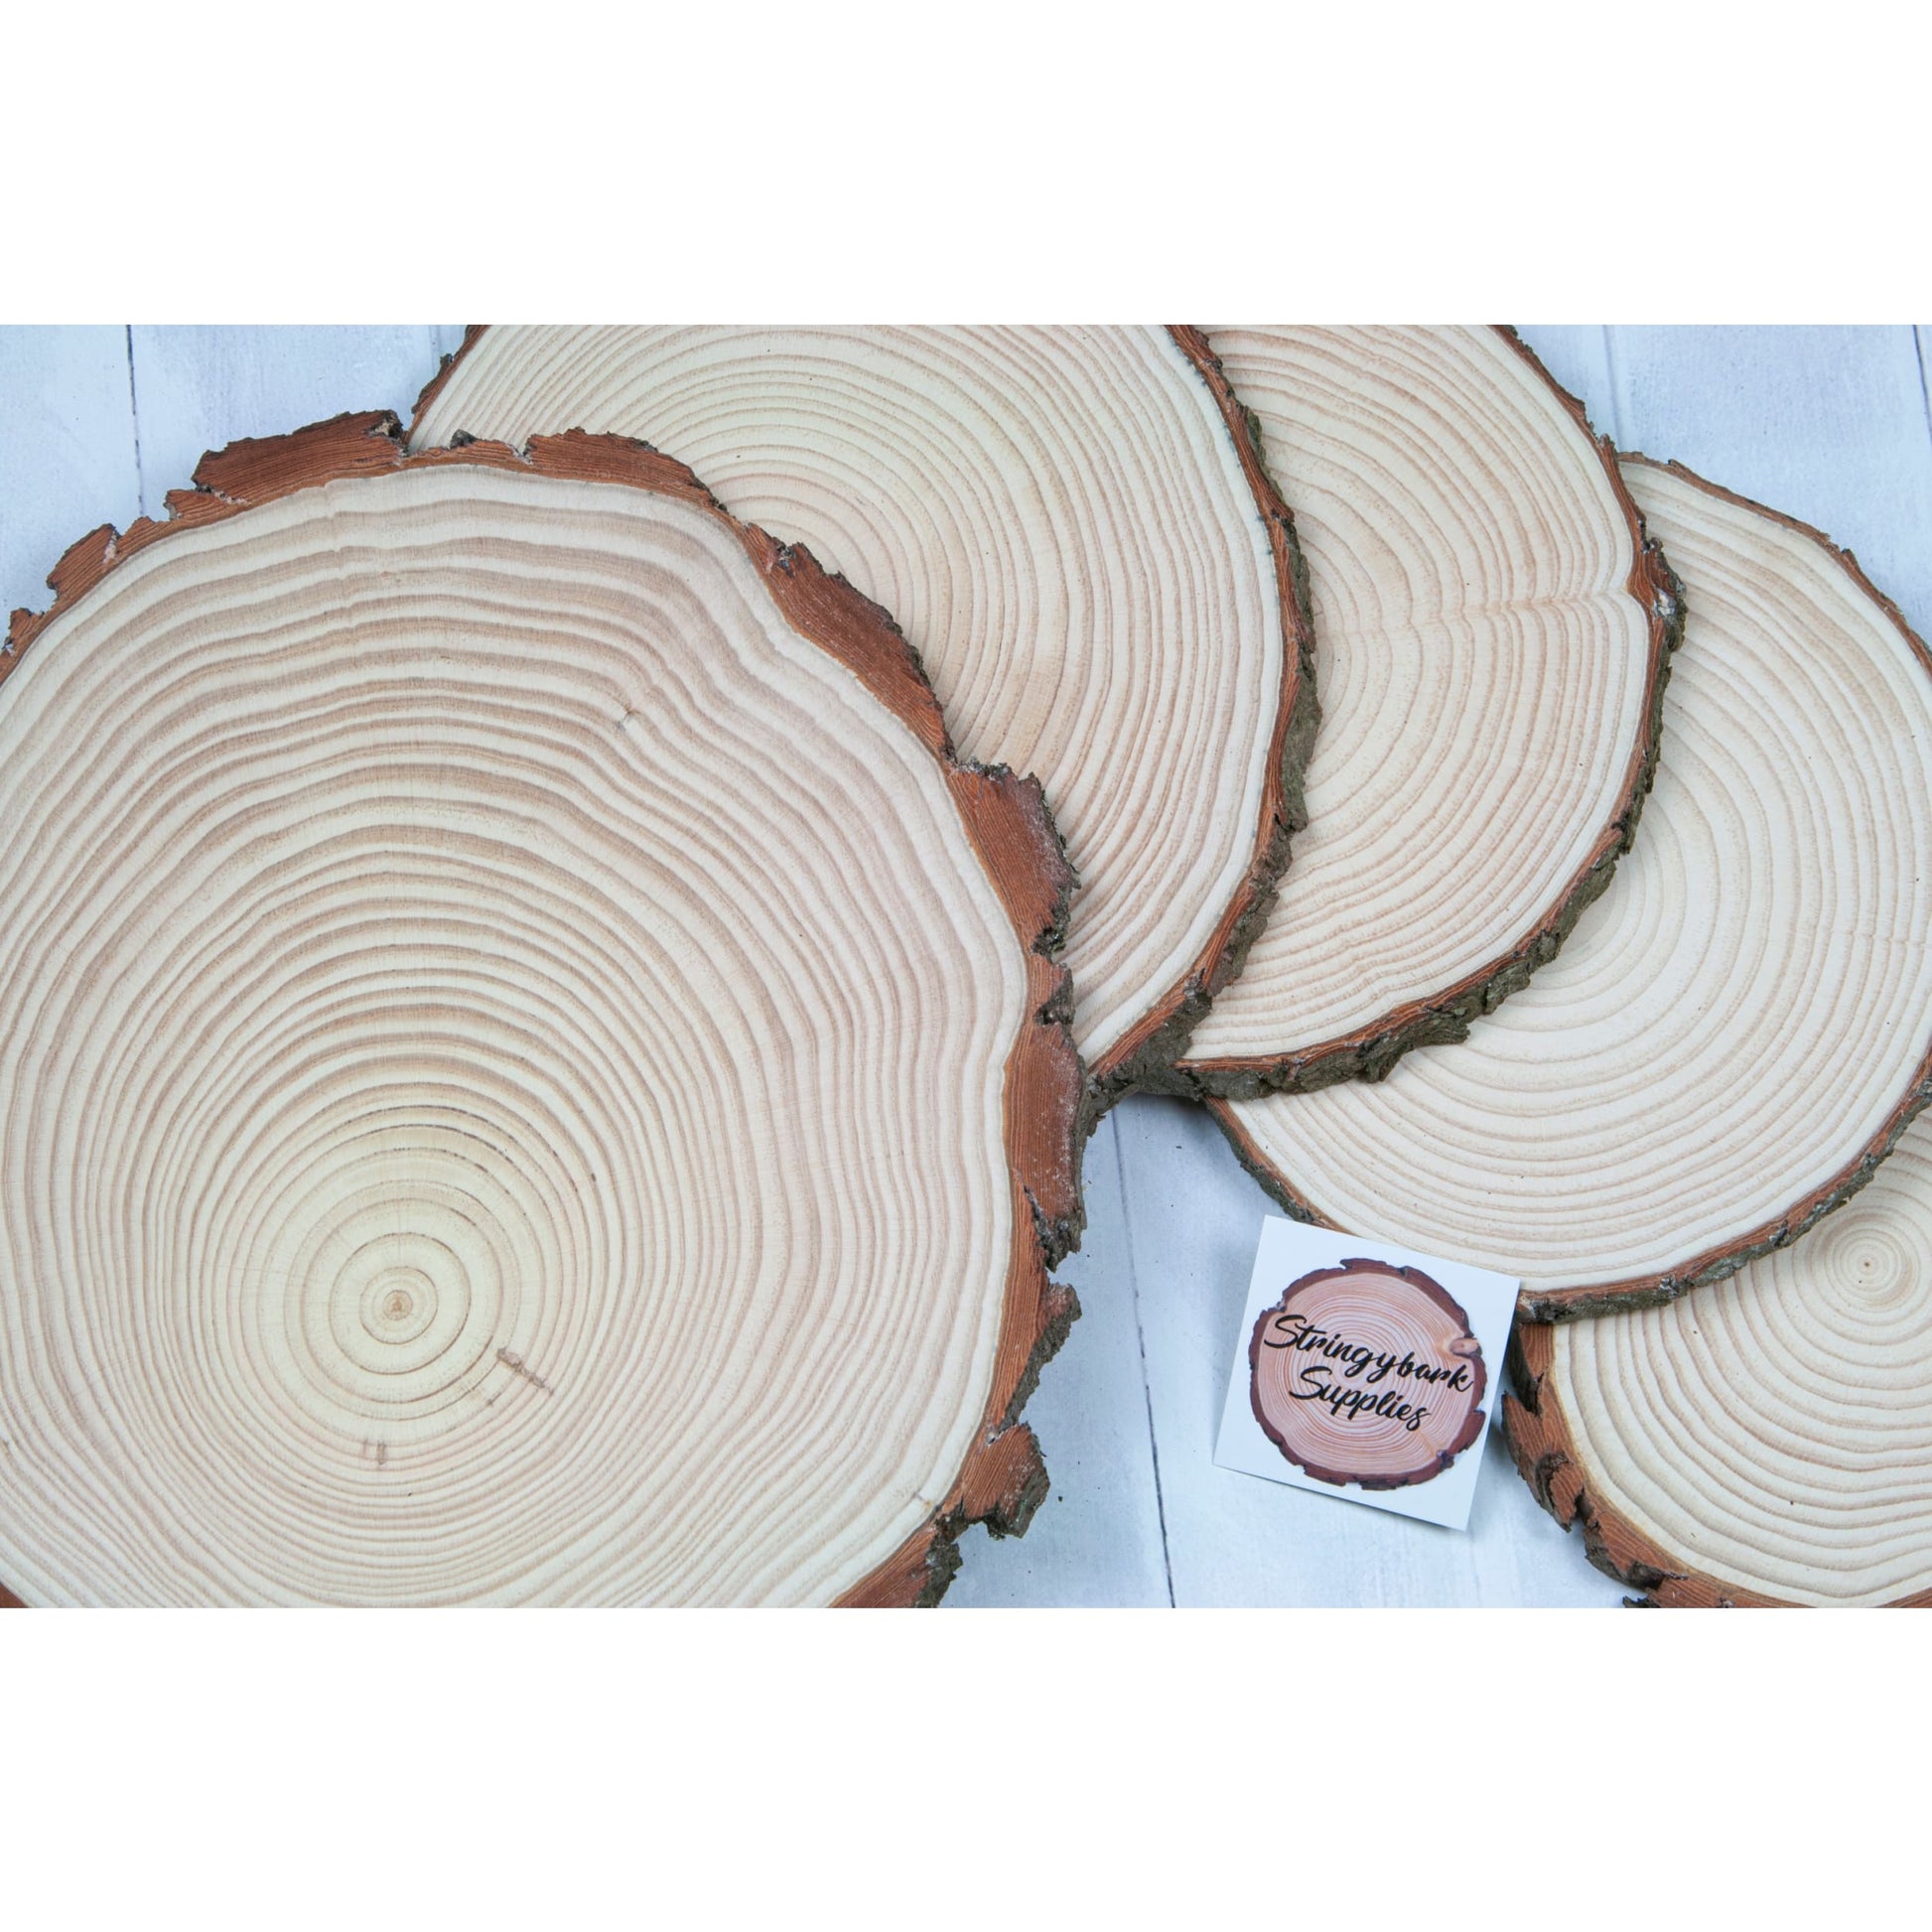 Large Wood Slices 4 Pcs 12-14 Inches Wood Rounds Natural Wood Slices for  Centerp